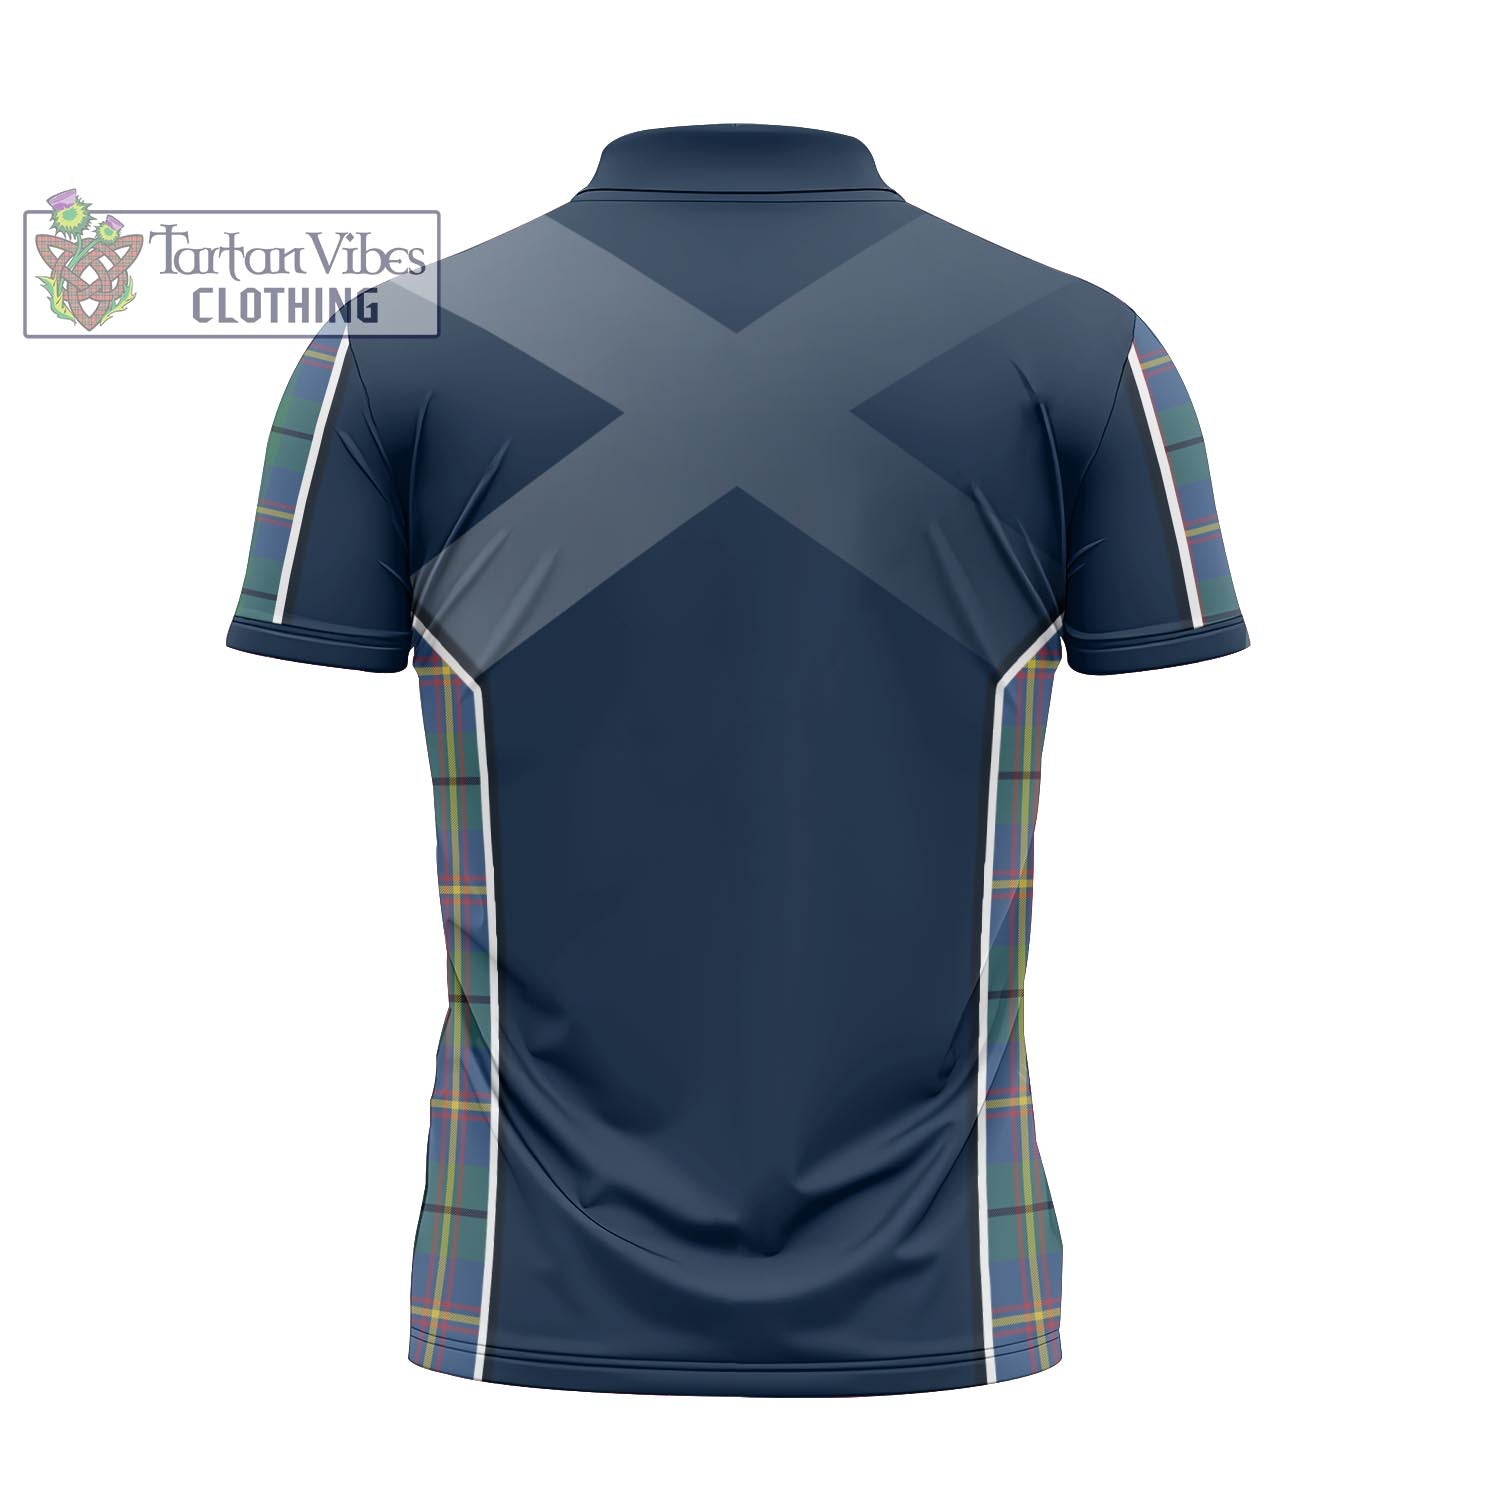 Tartan Vibes Clothing Carmichael Ancient Tartan Zipper Polo Shirt with Family Crest and Scottish Thistle Vibes Sport Style